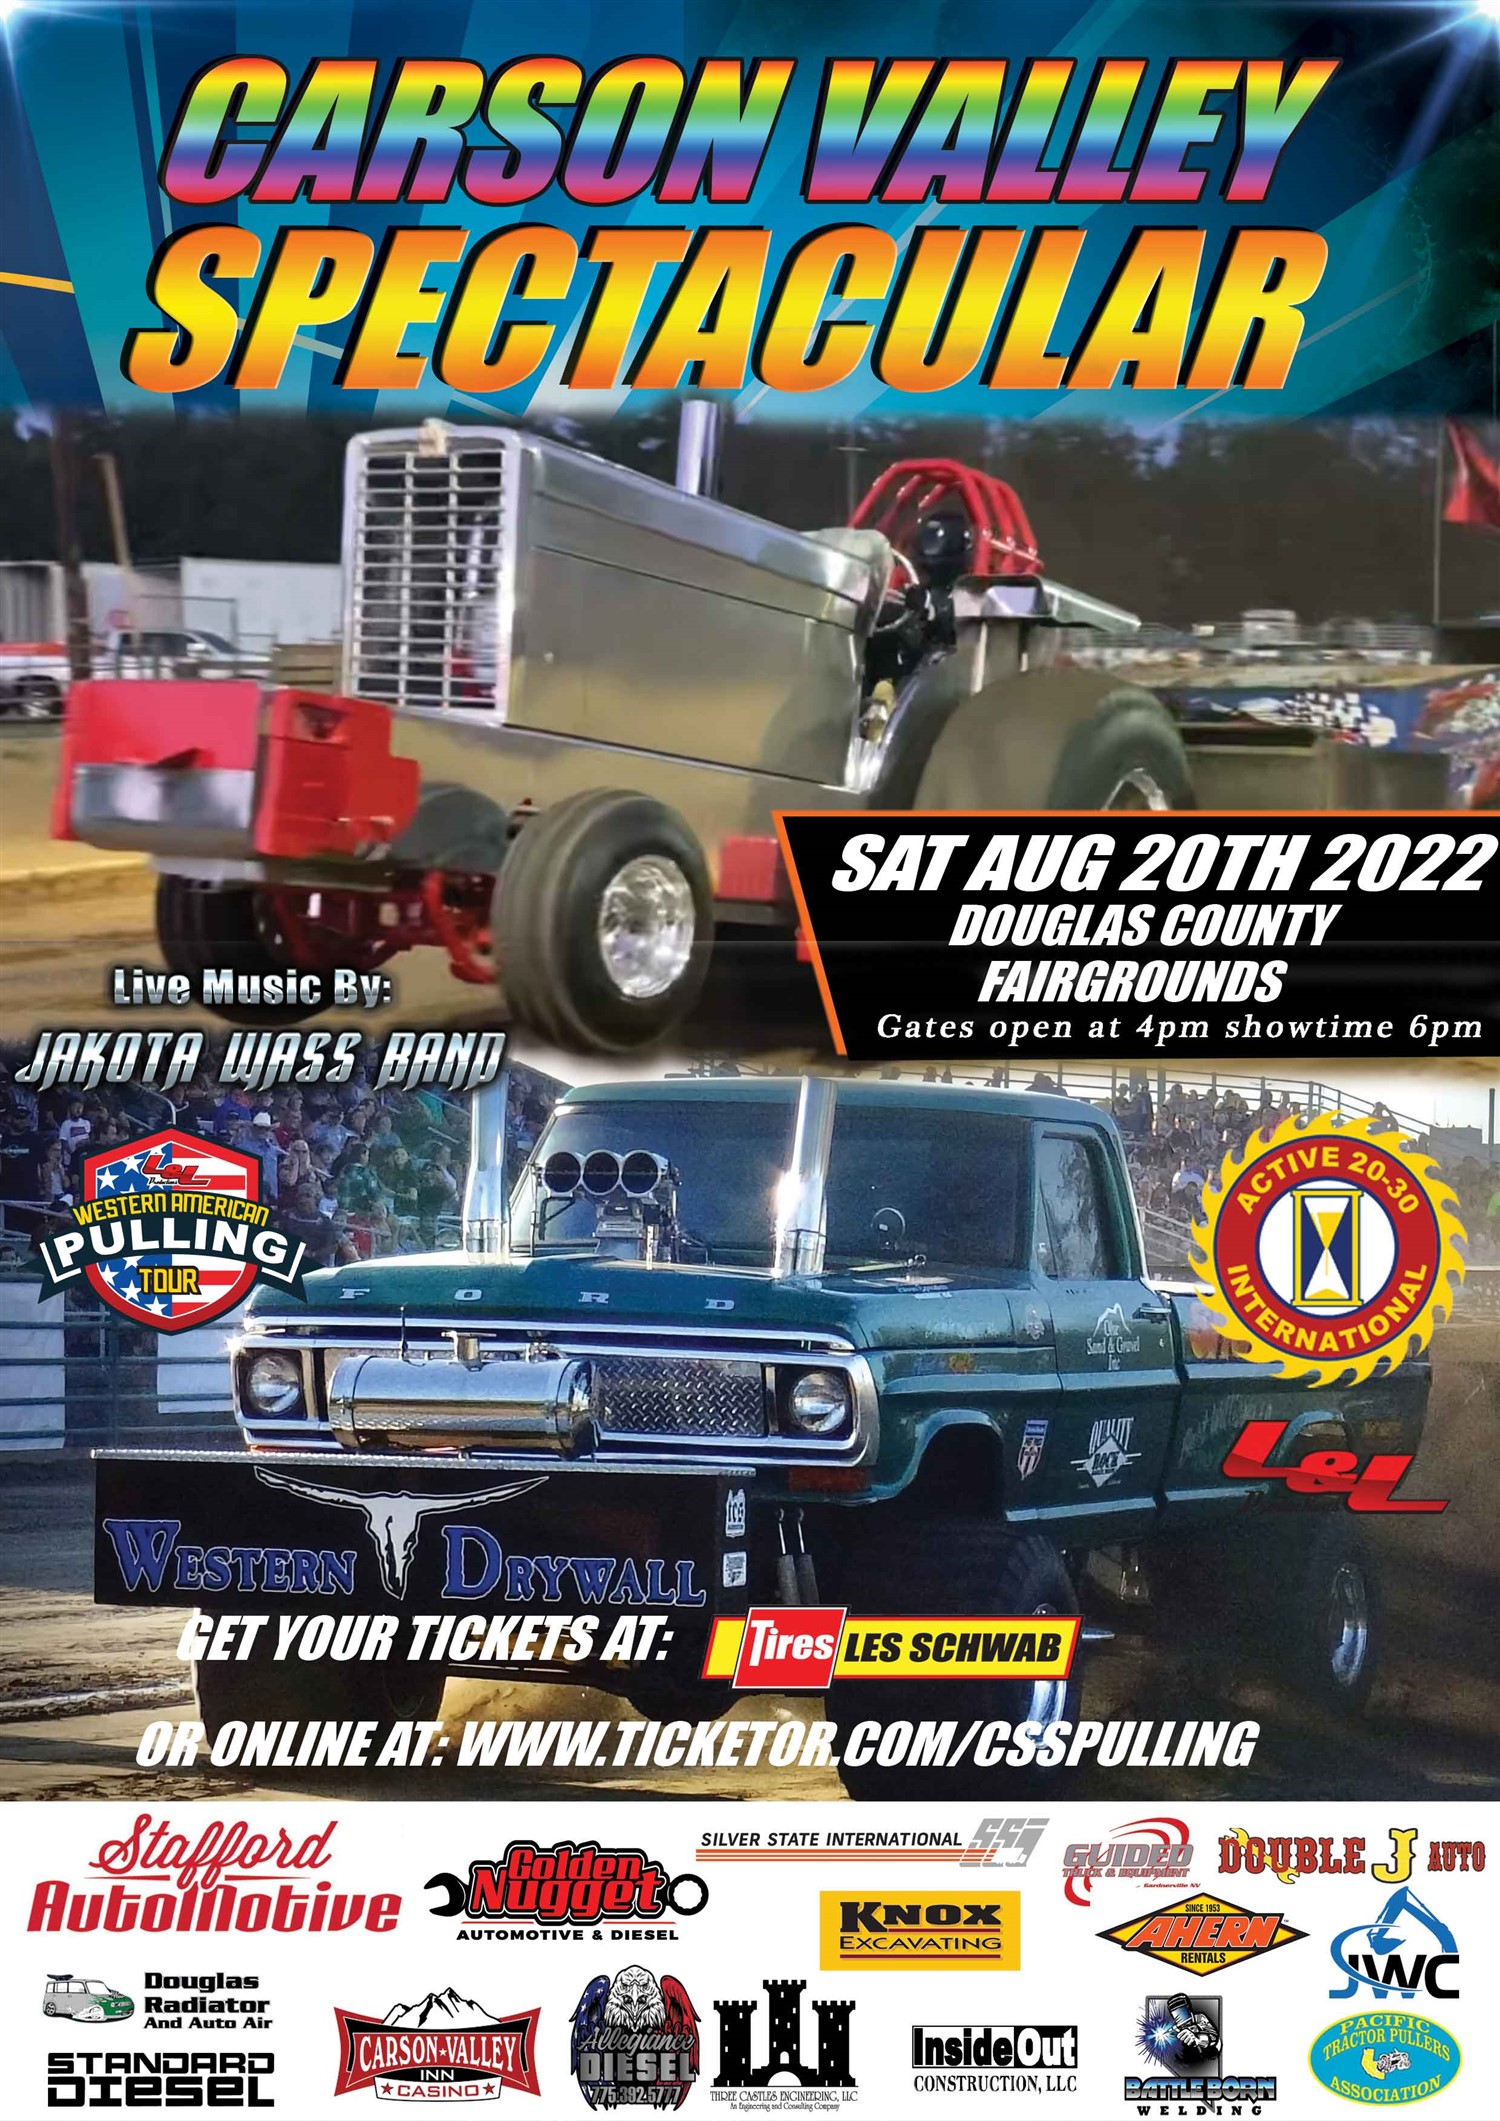 Carson Valley Spectacular 2022  on ago. 20, 18:00@Douglas County Fairgrounds - Buy tickets and Get information on L & L Productions 